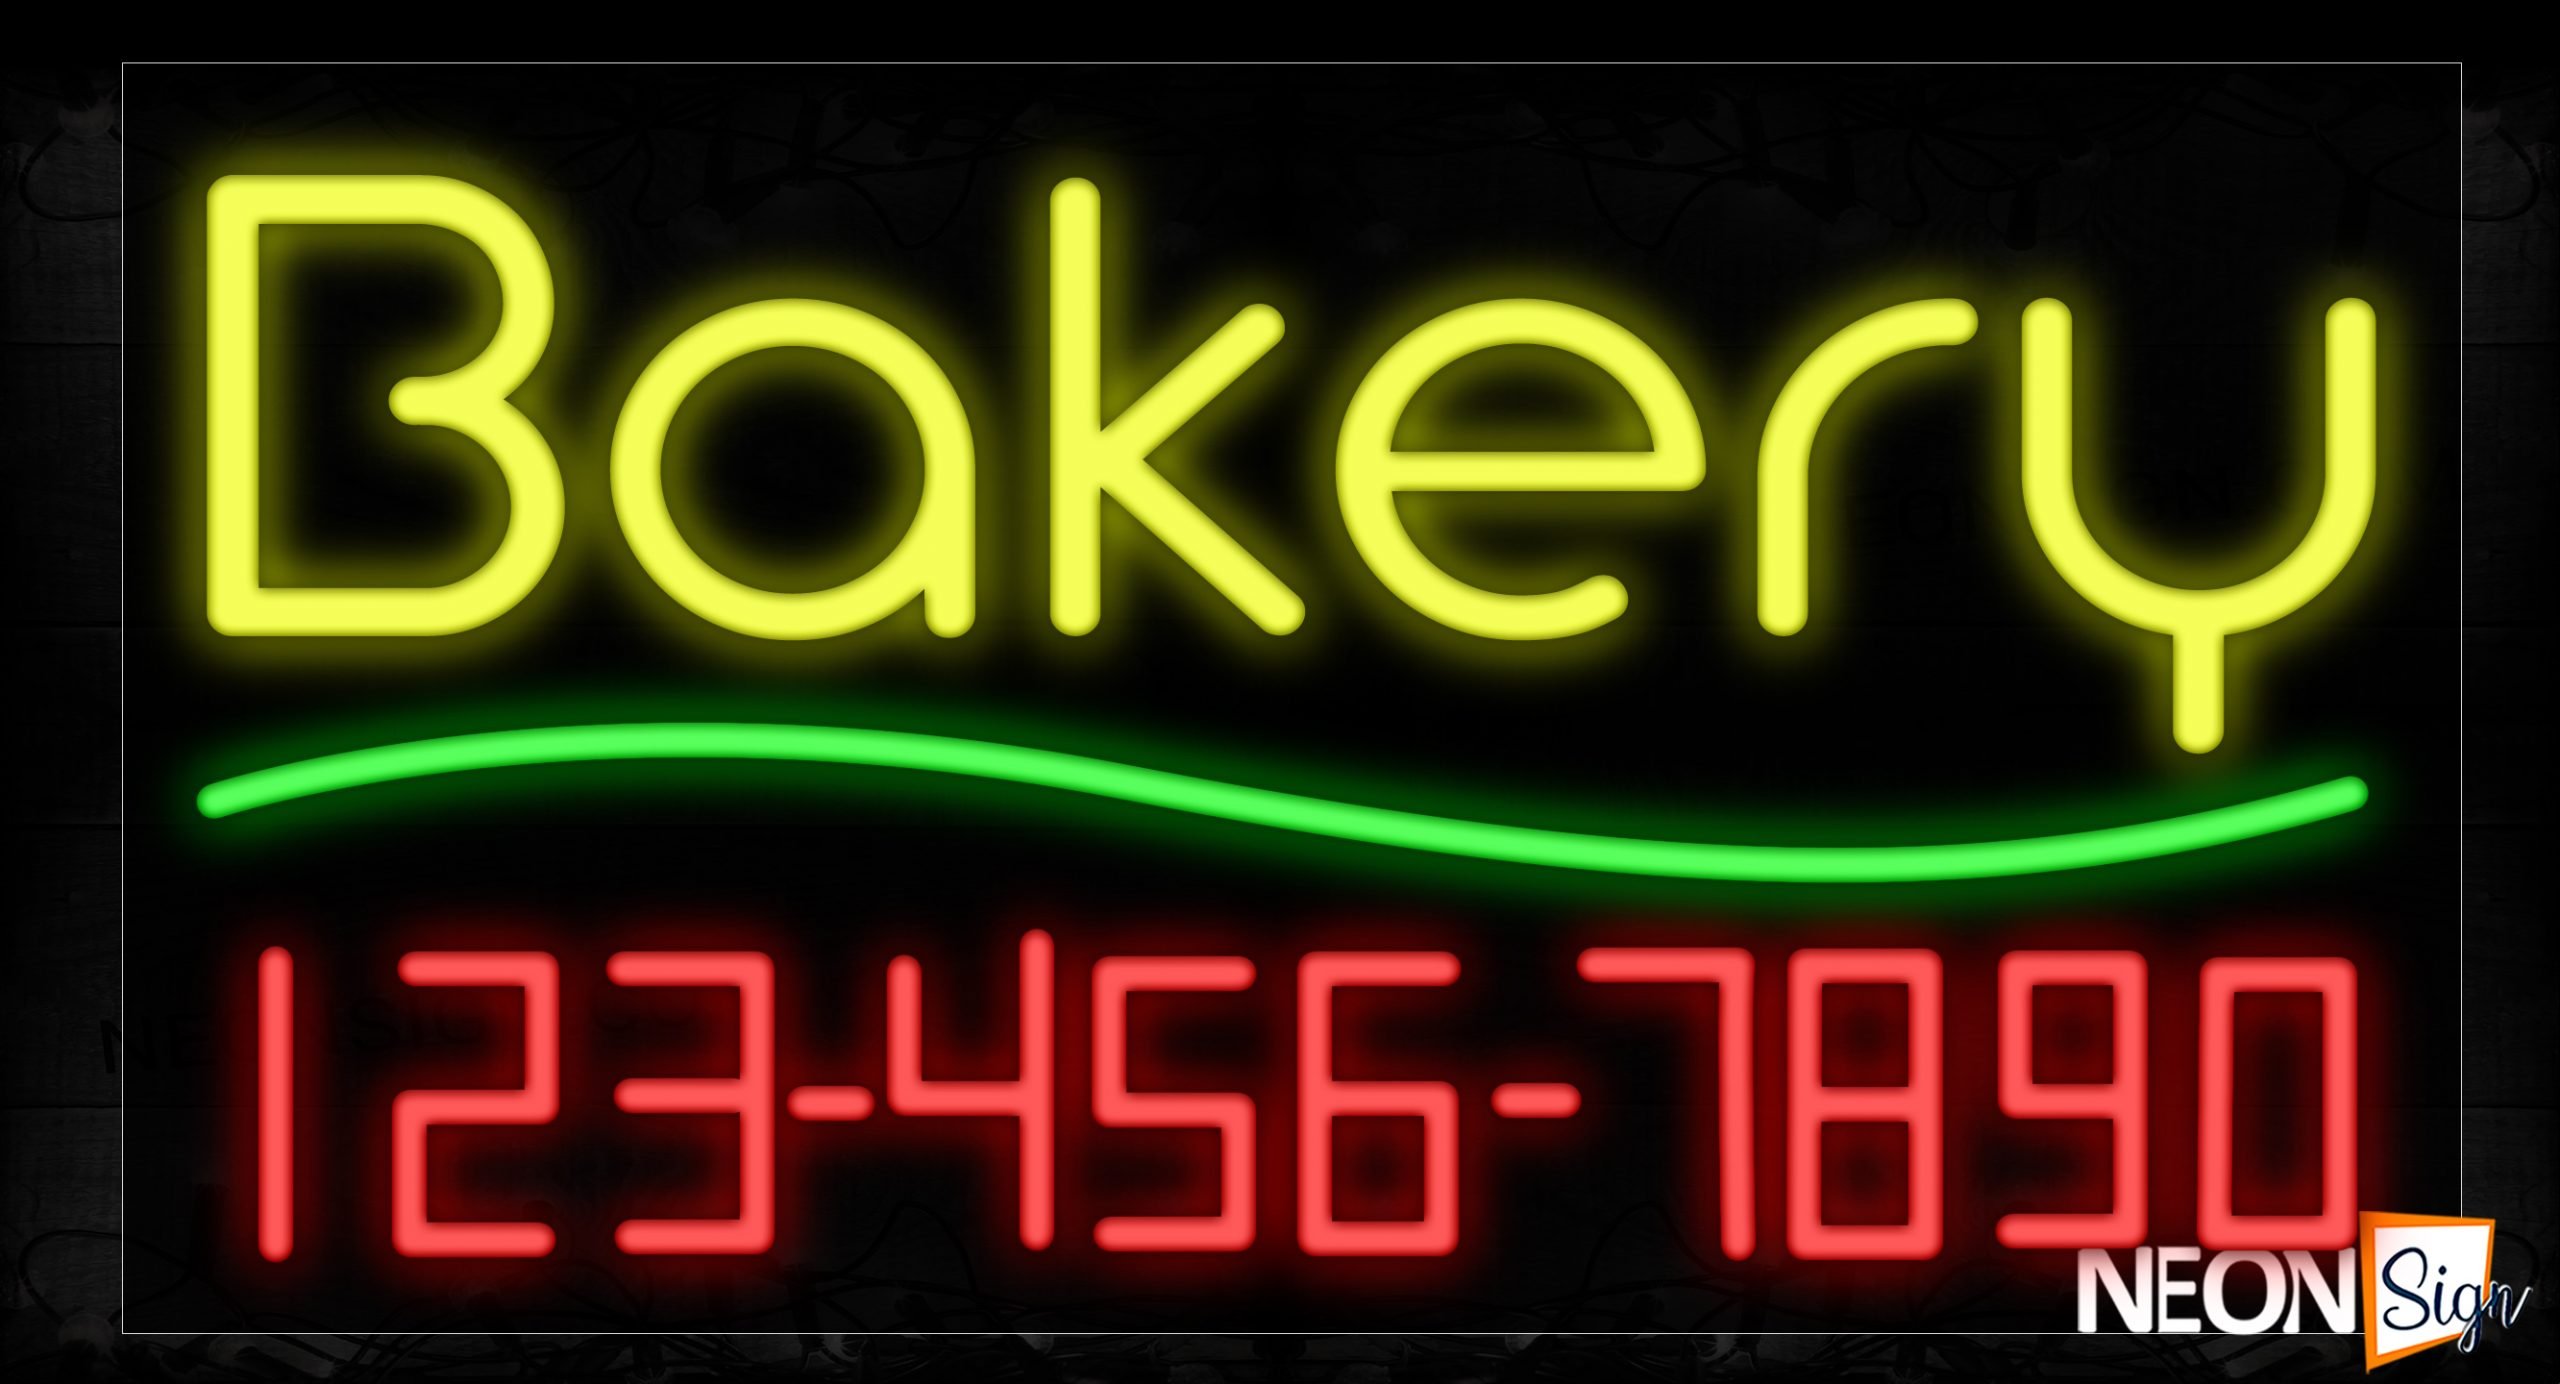 Image of 15017 Bakery With Contact No Neon Signs_20x37 Black Backing